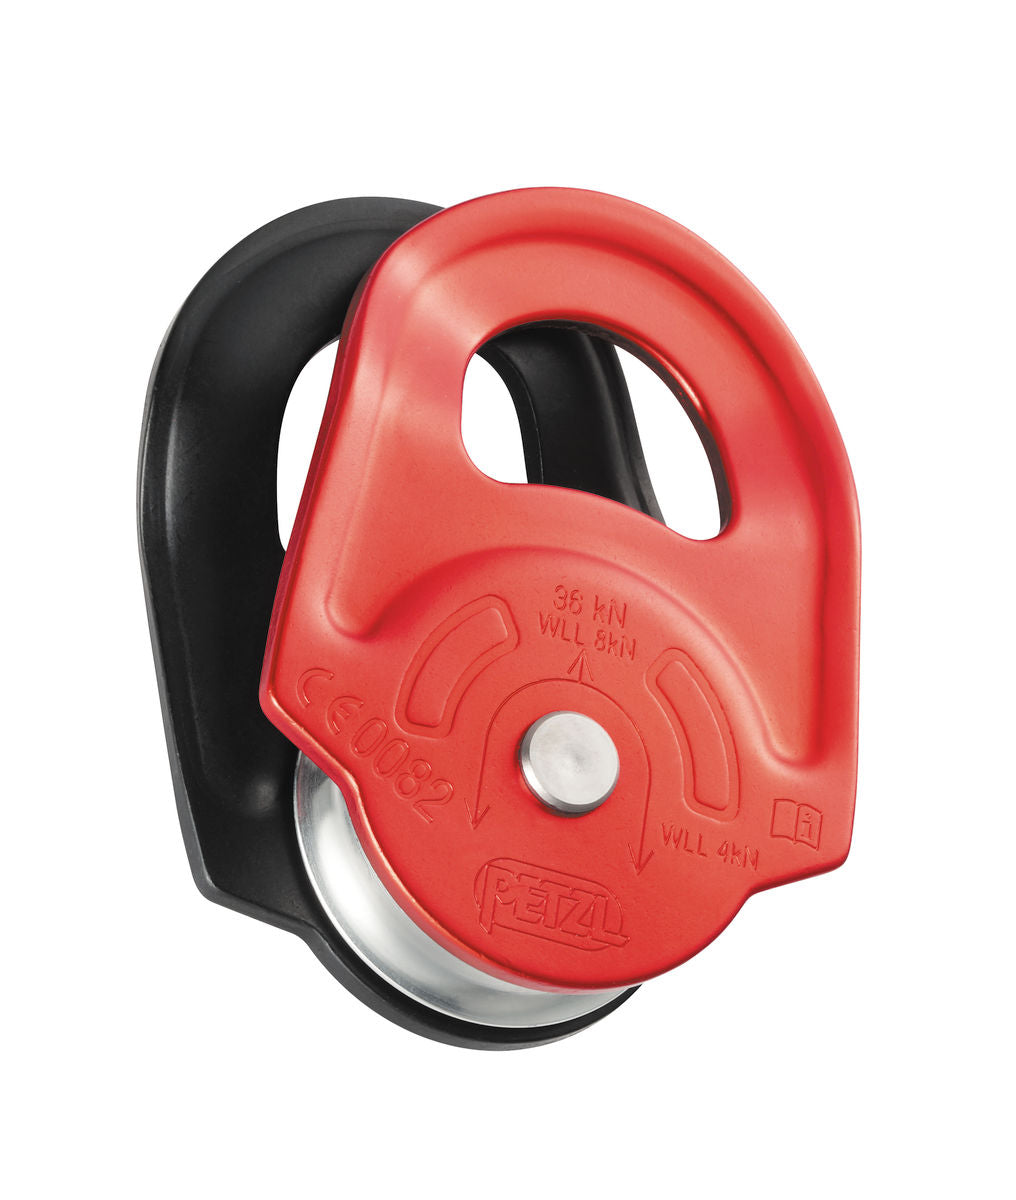 Petzl RESCUE pulley, high strength with swinging side plates, NFPA, 95% efficiency